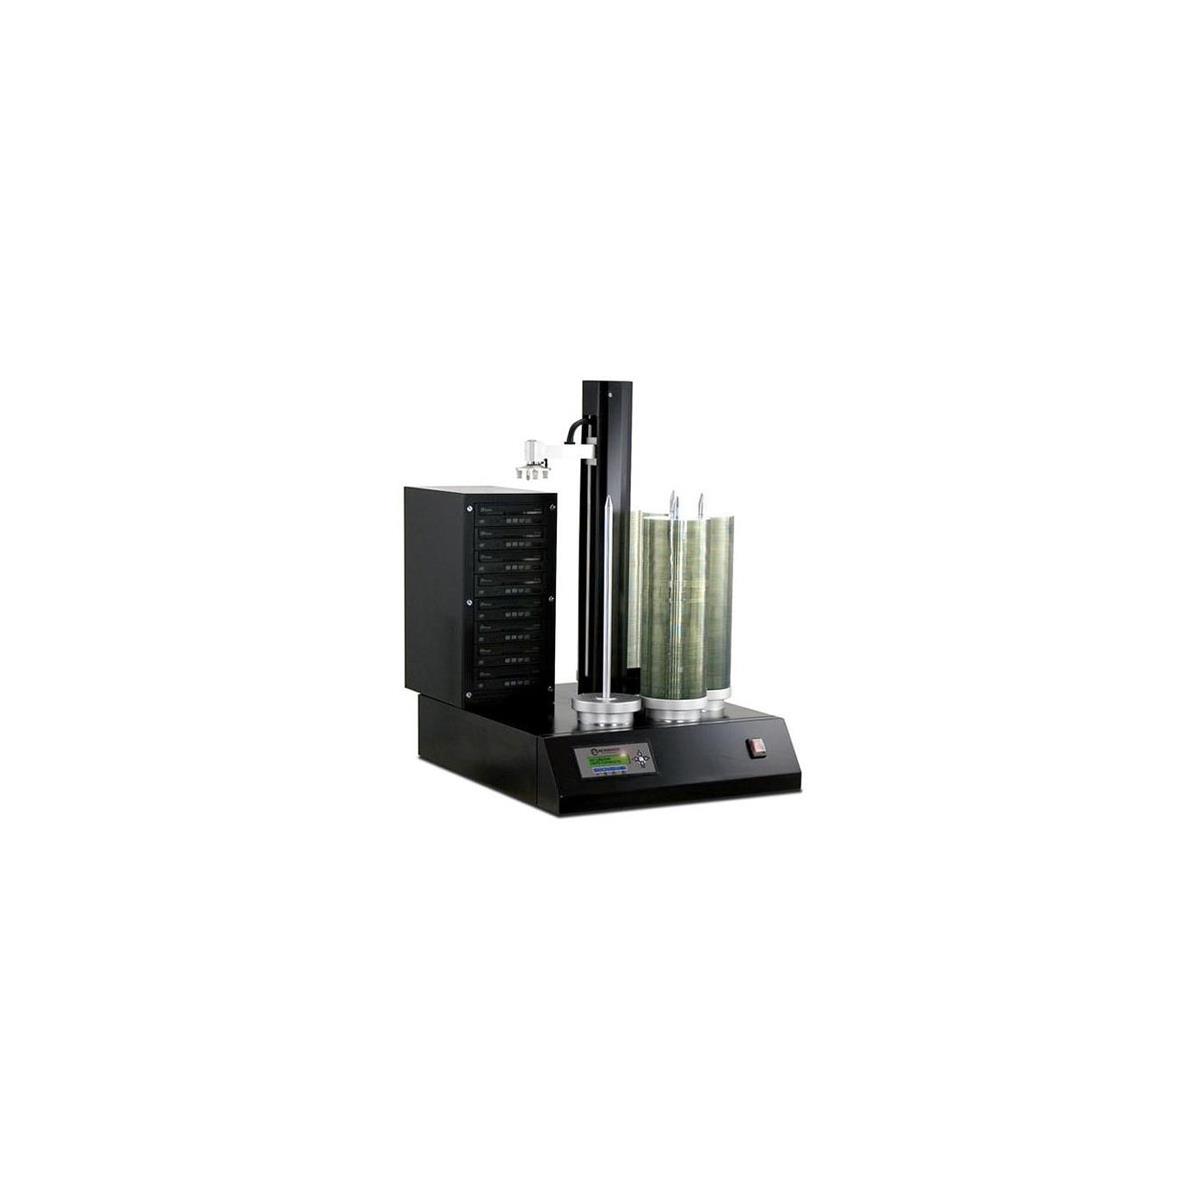 Image of Microboards Technology Microboards HCL-BD4000 6-Drive Blu-ray Duplicator